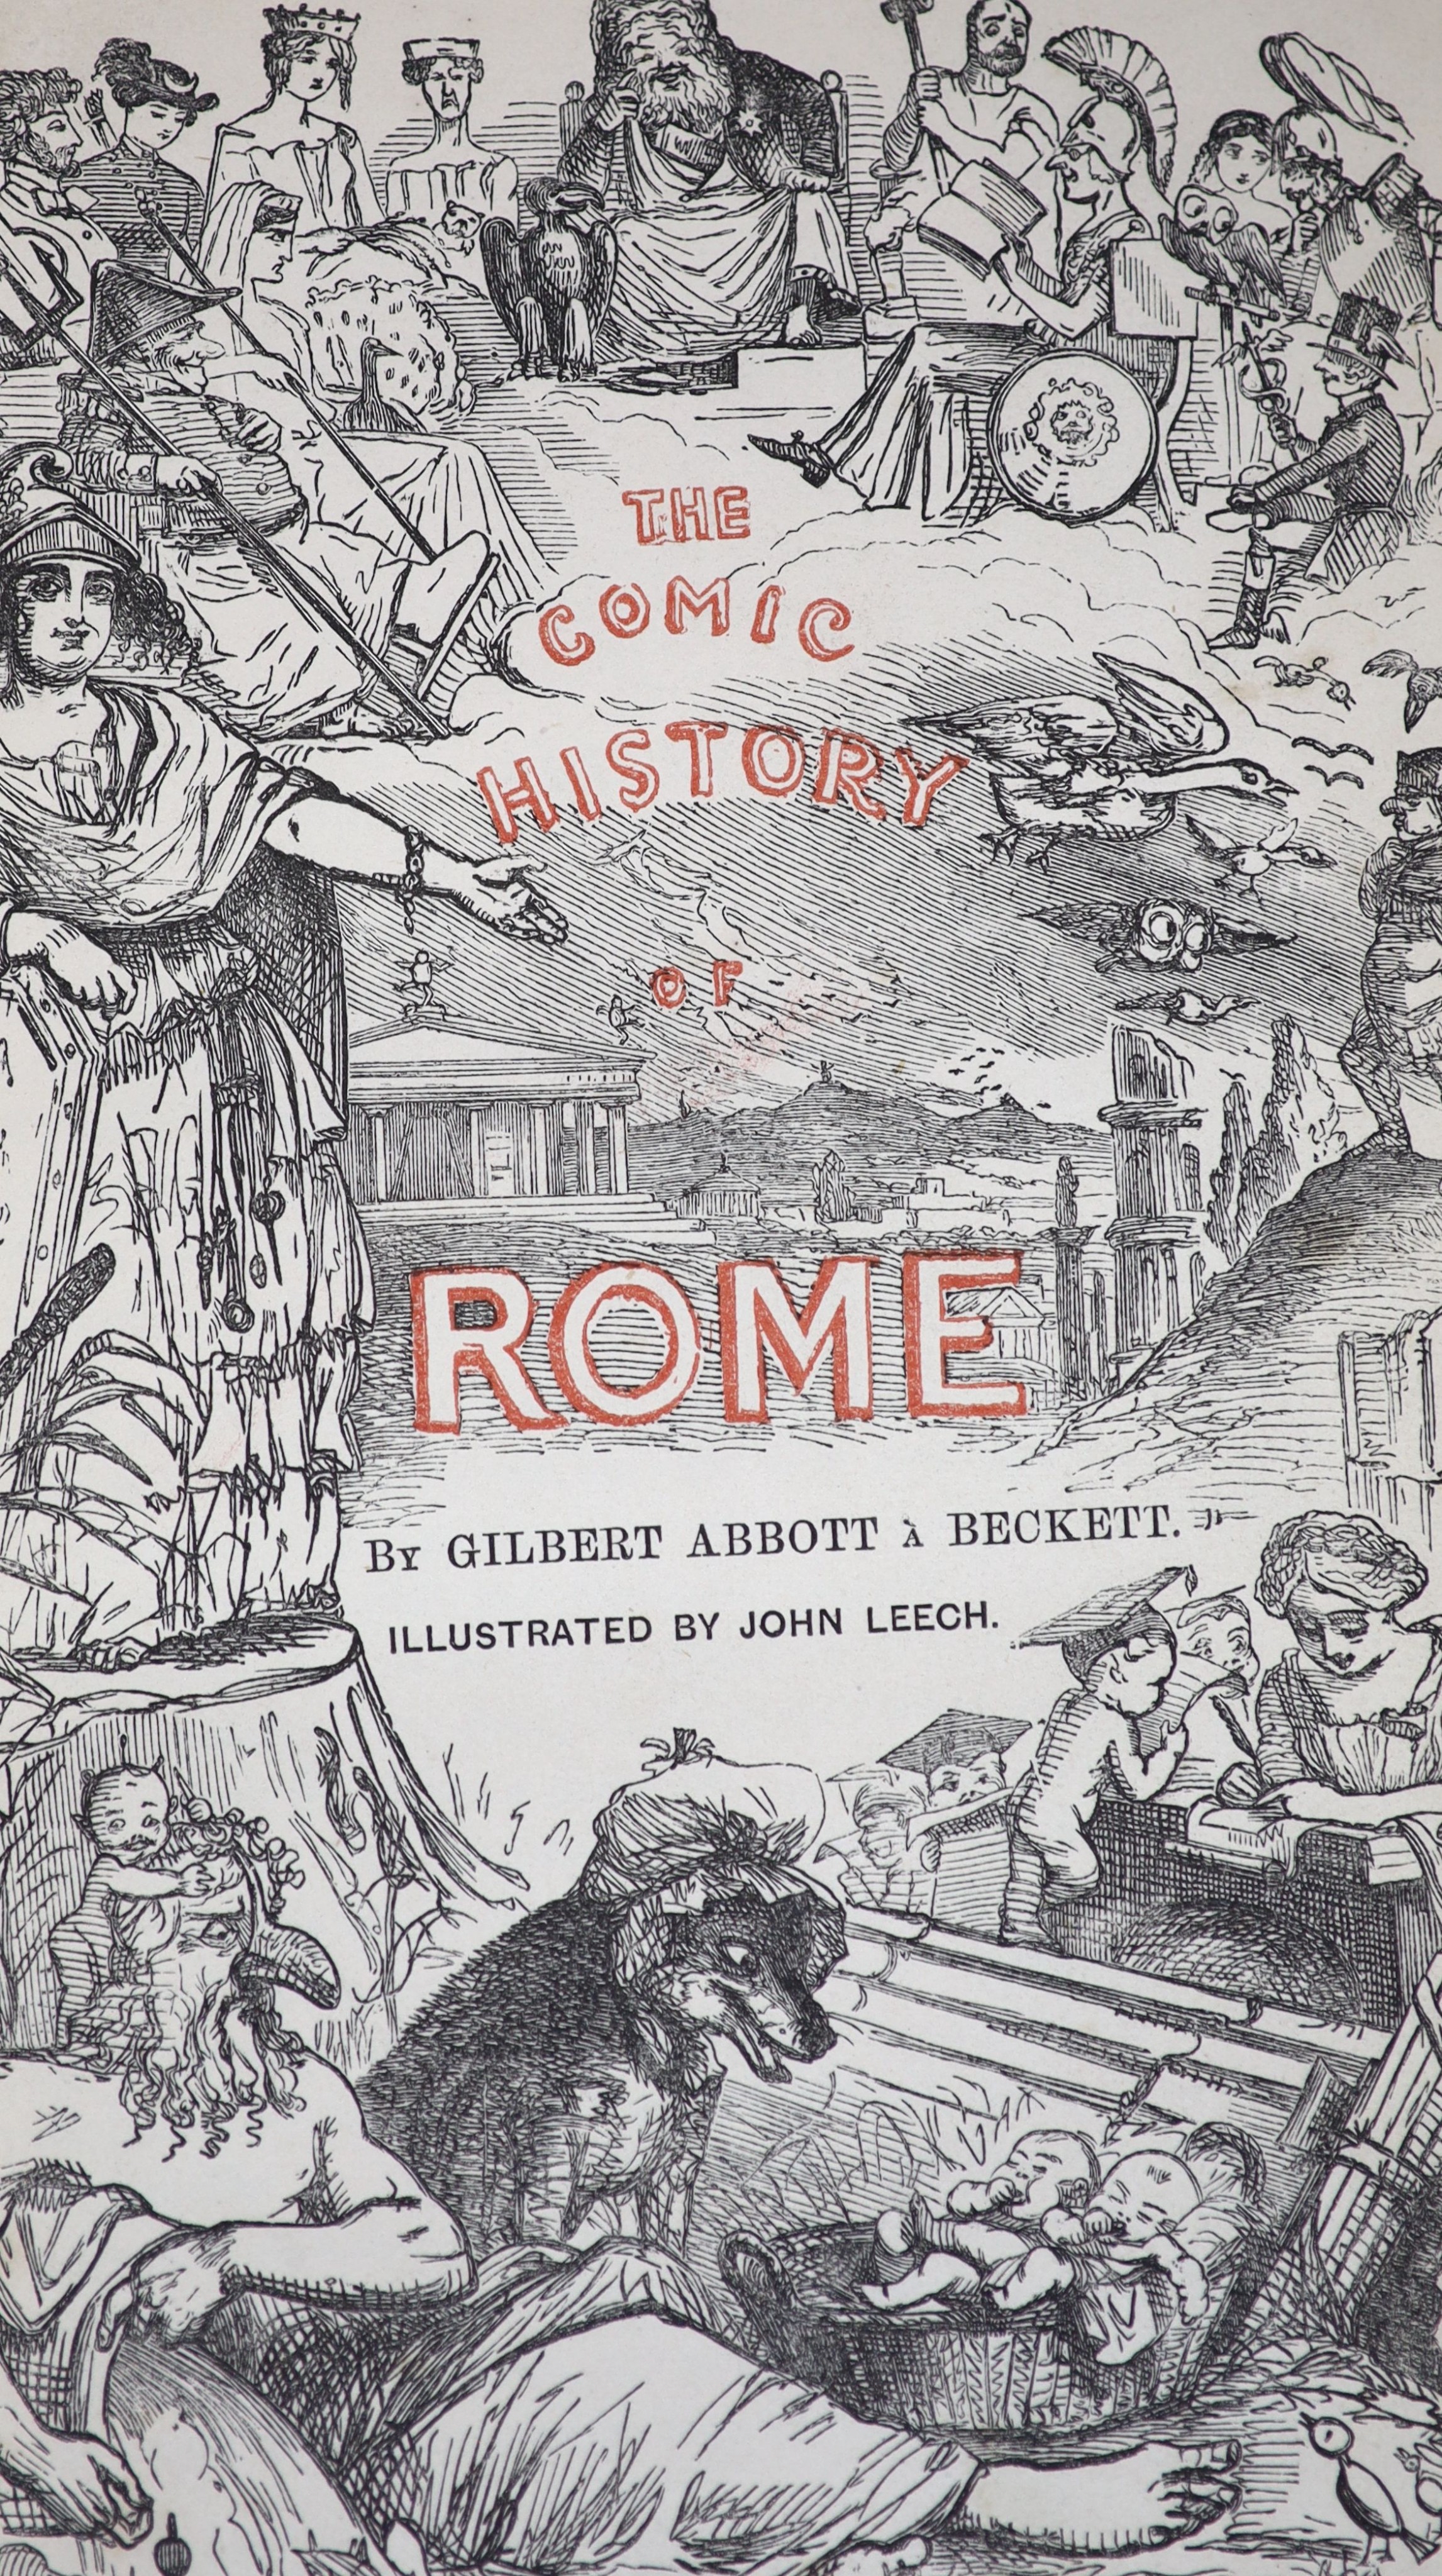 A’Beckett, Gilbert Abbott - The Comic History of England, illustrated by John Leech, with 20 hand-coloured plates, and The Comic History of Rome, with 10 hand-coloured plates, some with spotting, 8vo, uniformly bound, re